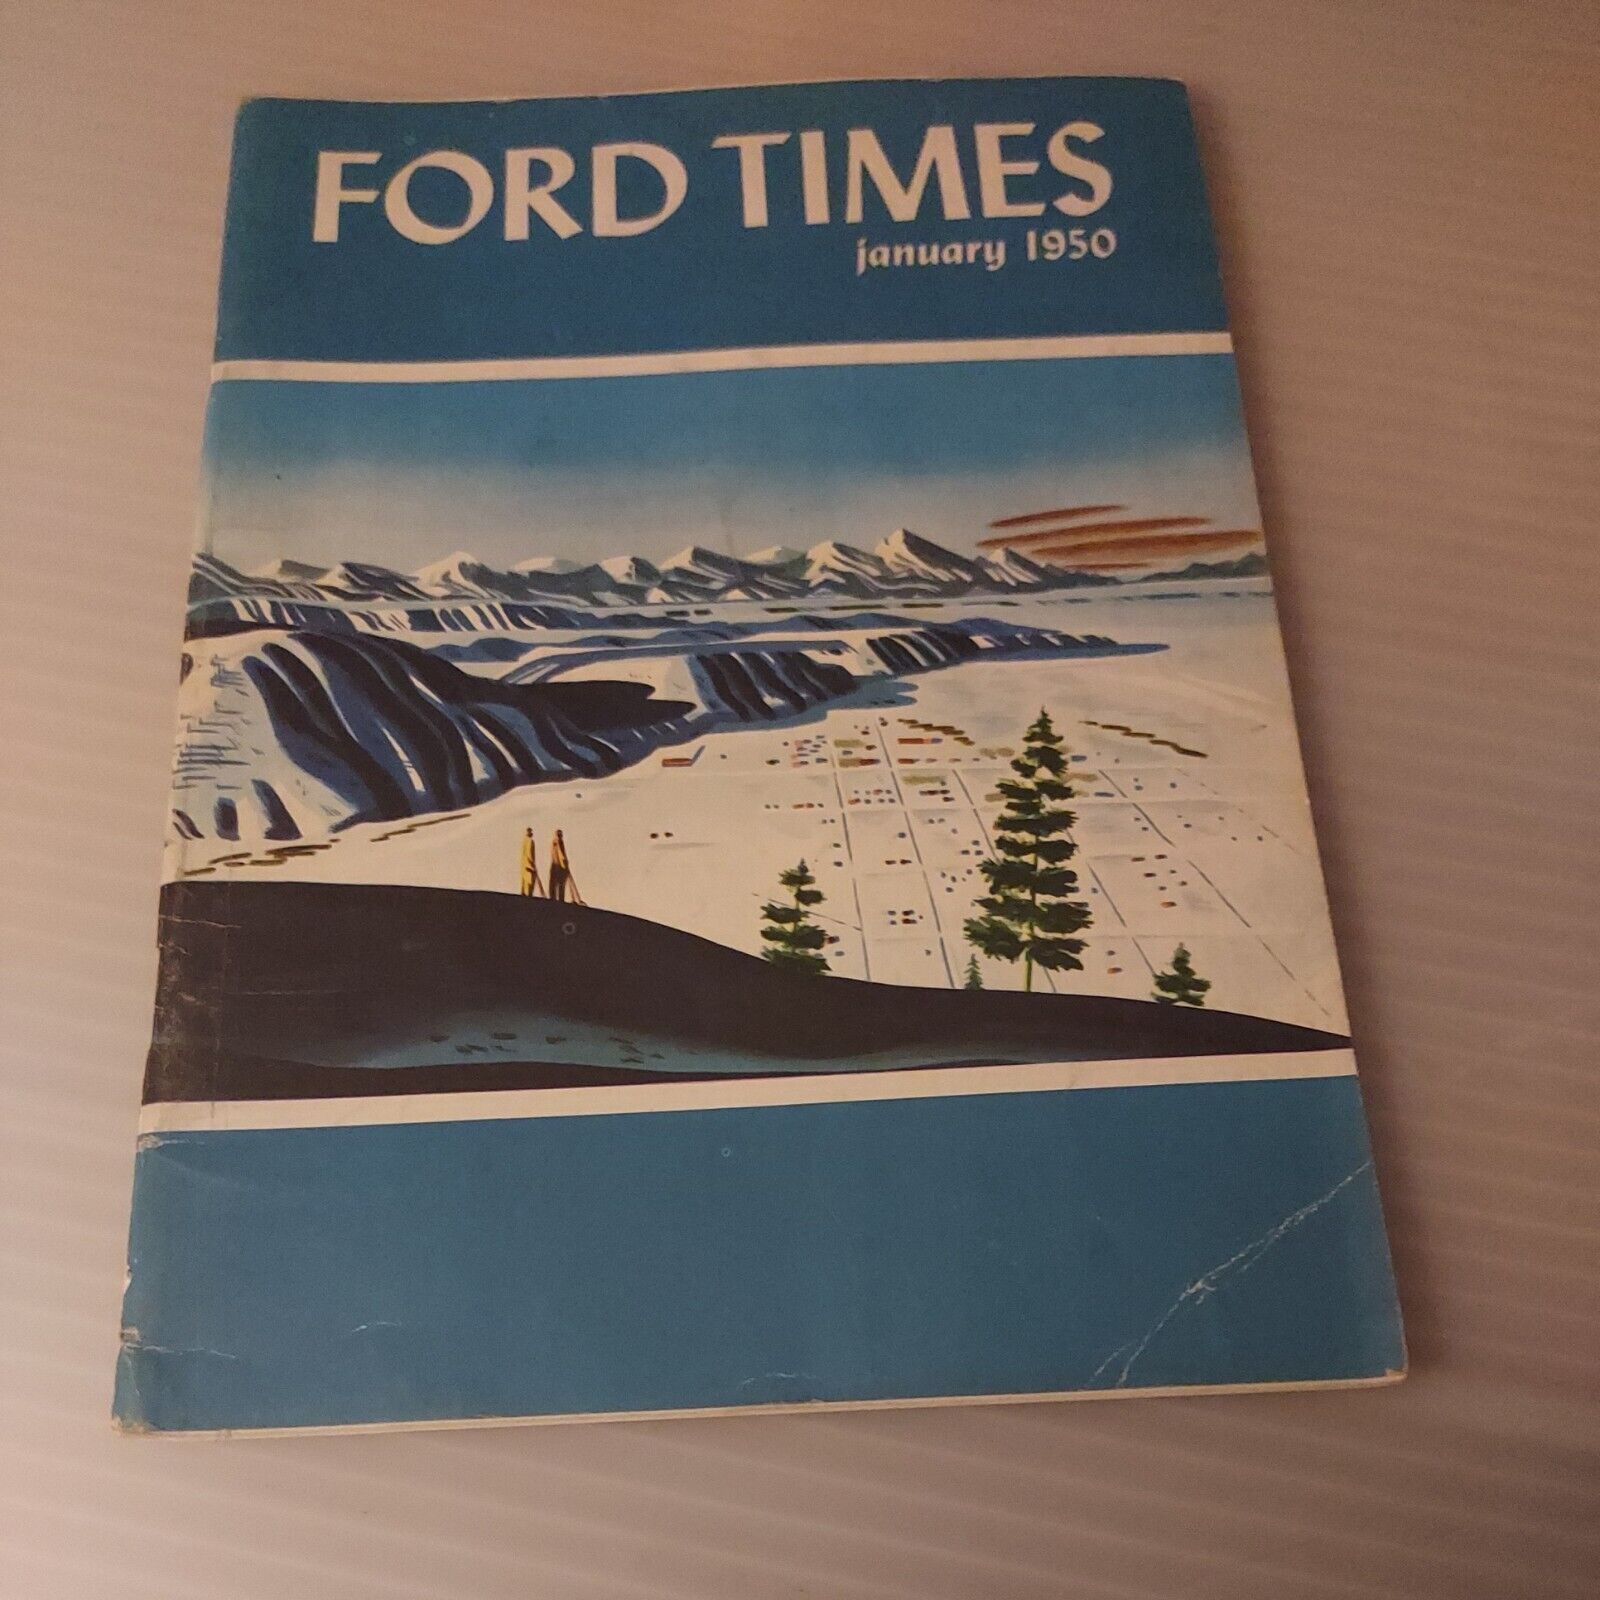 Vintage 1950 January, FORD TIMES Magazine, You Help Build Better Cars